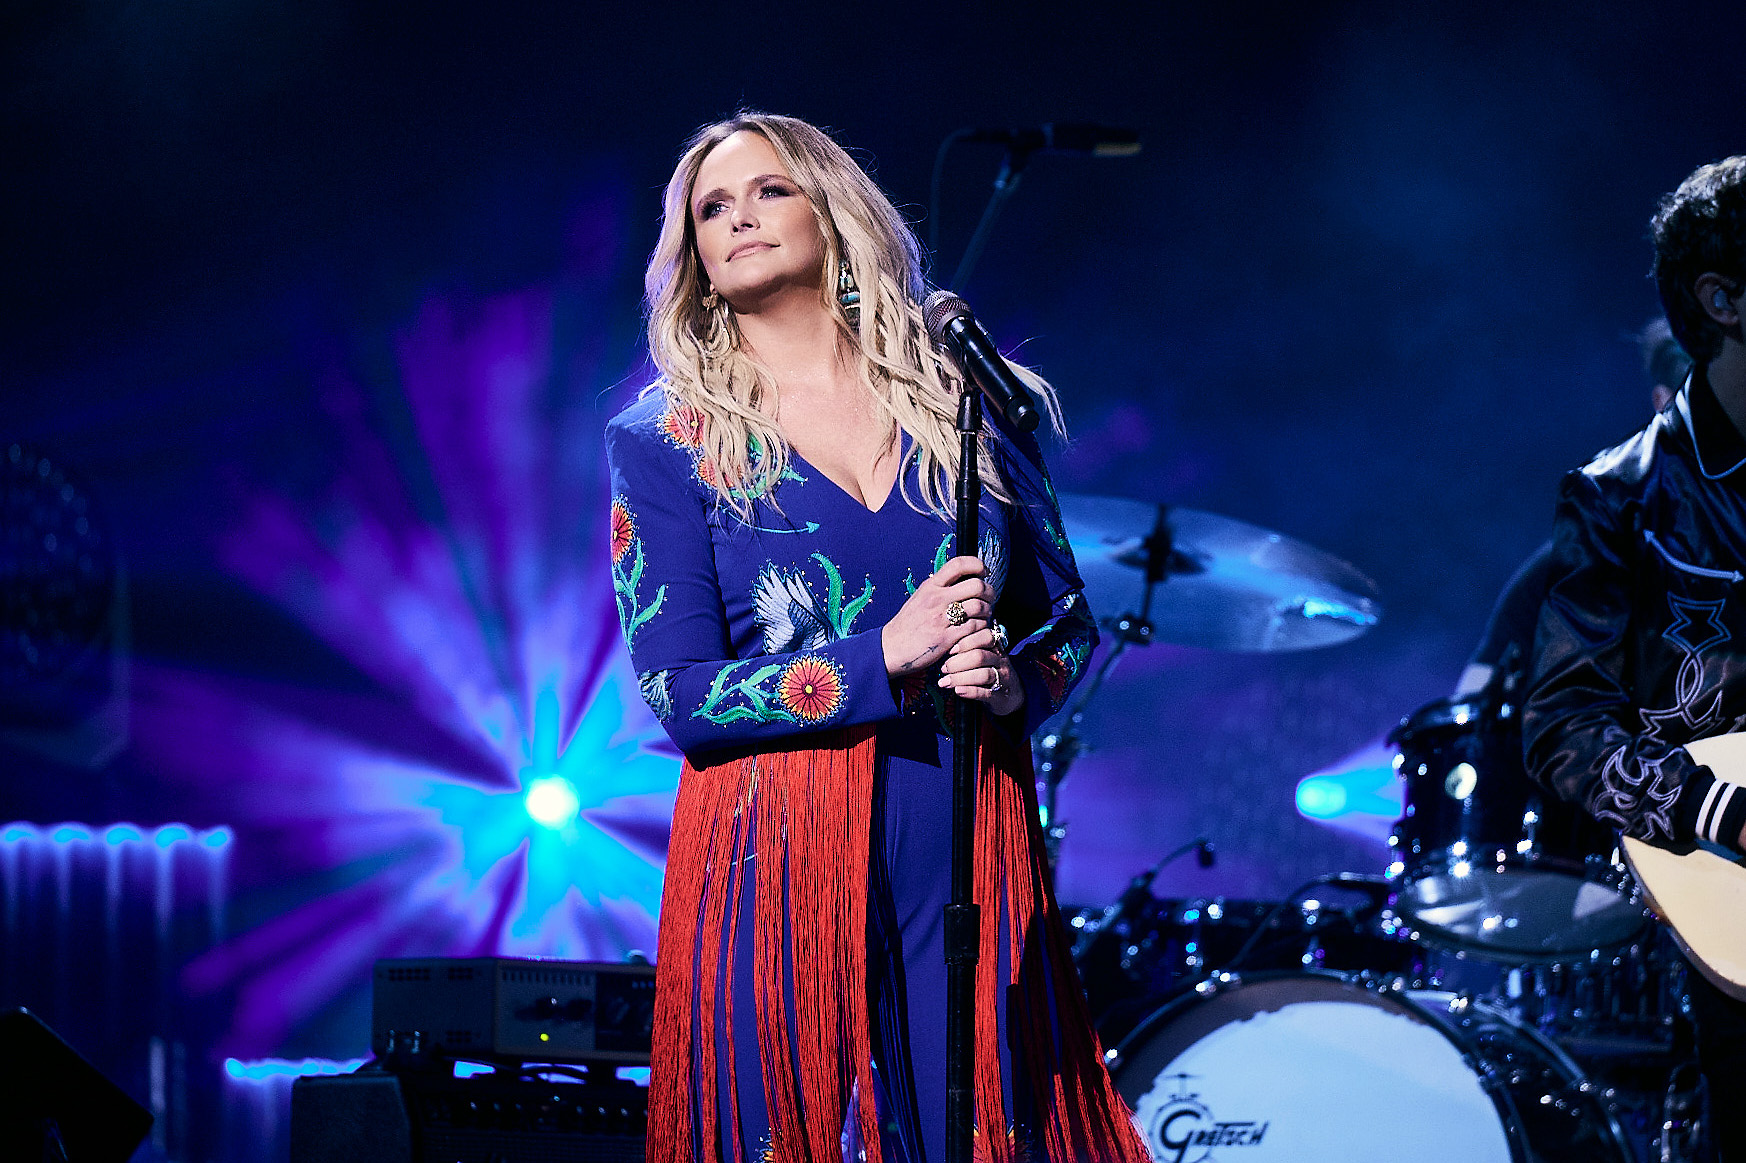 Miranda Lambert wears a red and blue outfit on stage and holds a microphone stand